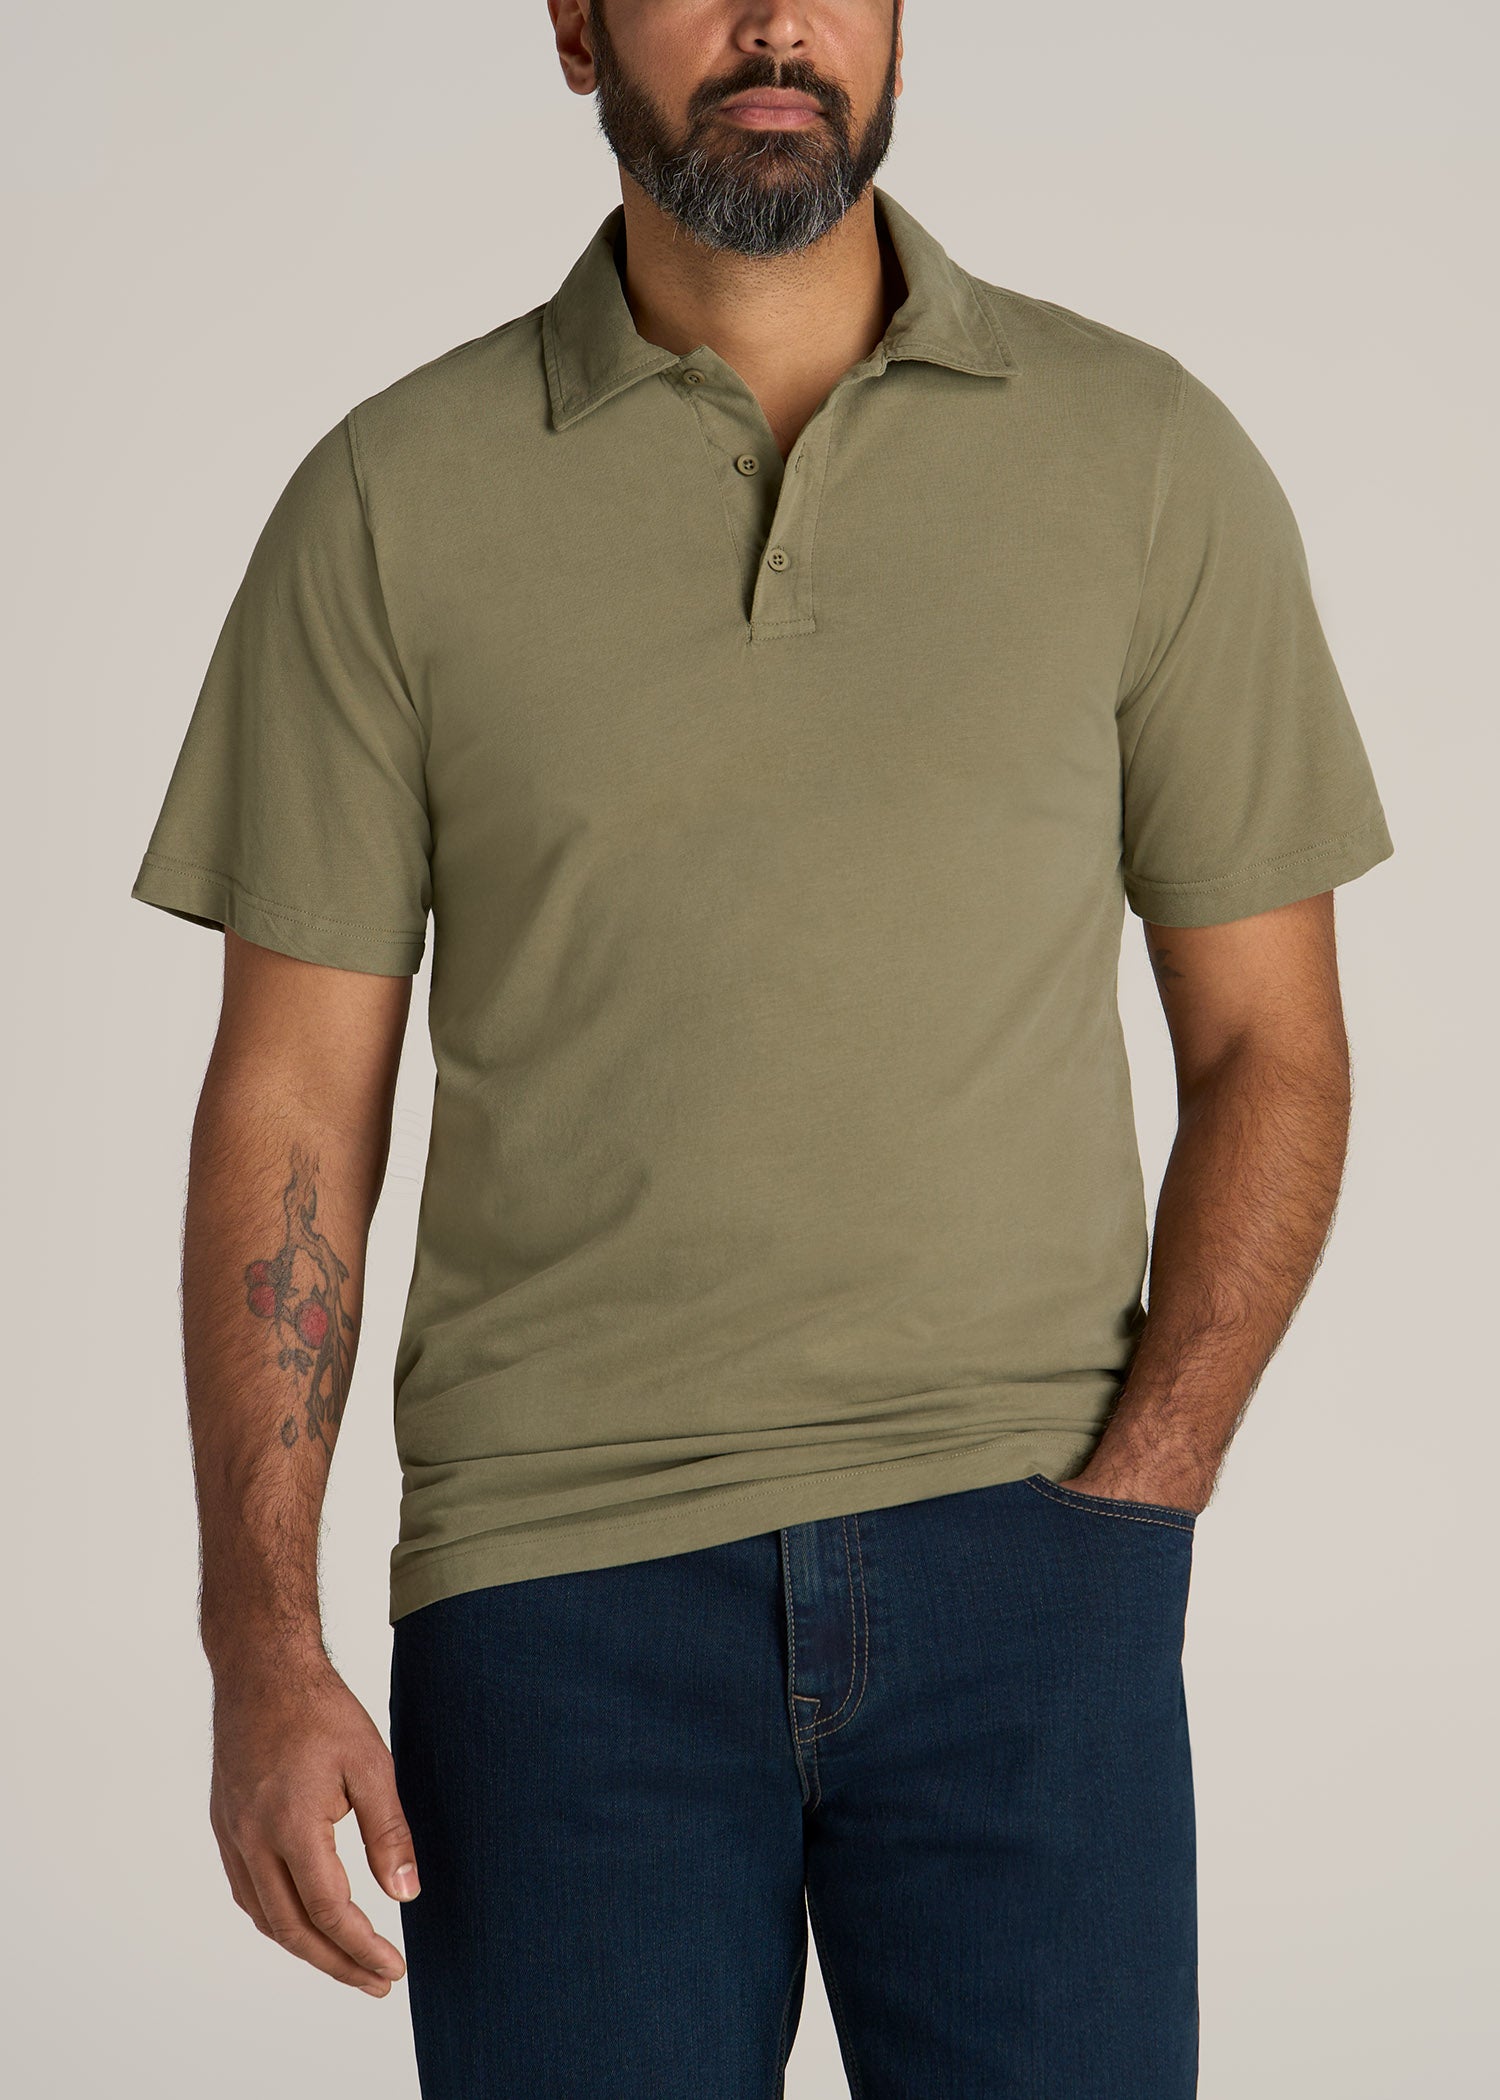 Classic Short-Sleeved Pique Polo - Men - Ready-to-Wear